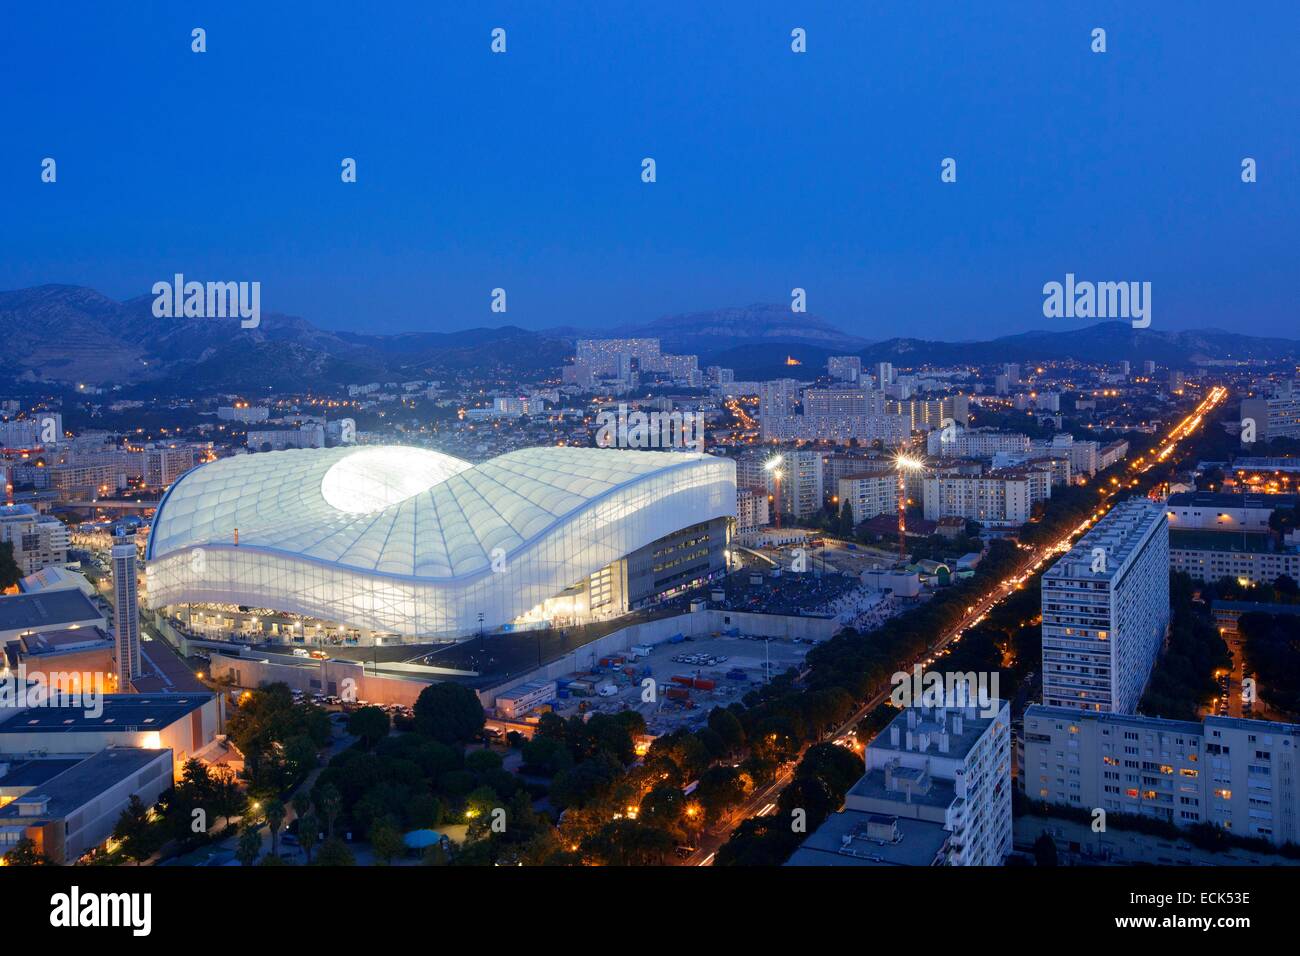 France, Bouches du Rhone, Marseille, Rond Point du Prado district, Chanot park and the Stade Velodrome from the building Le Grand Pavois Stock Photo